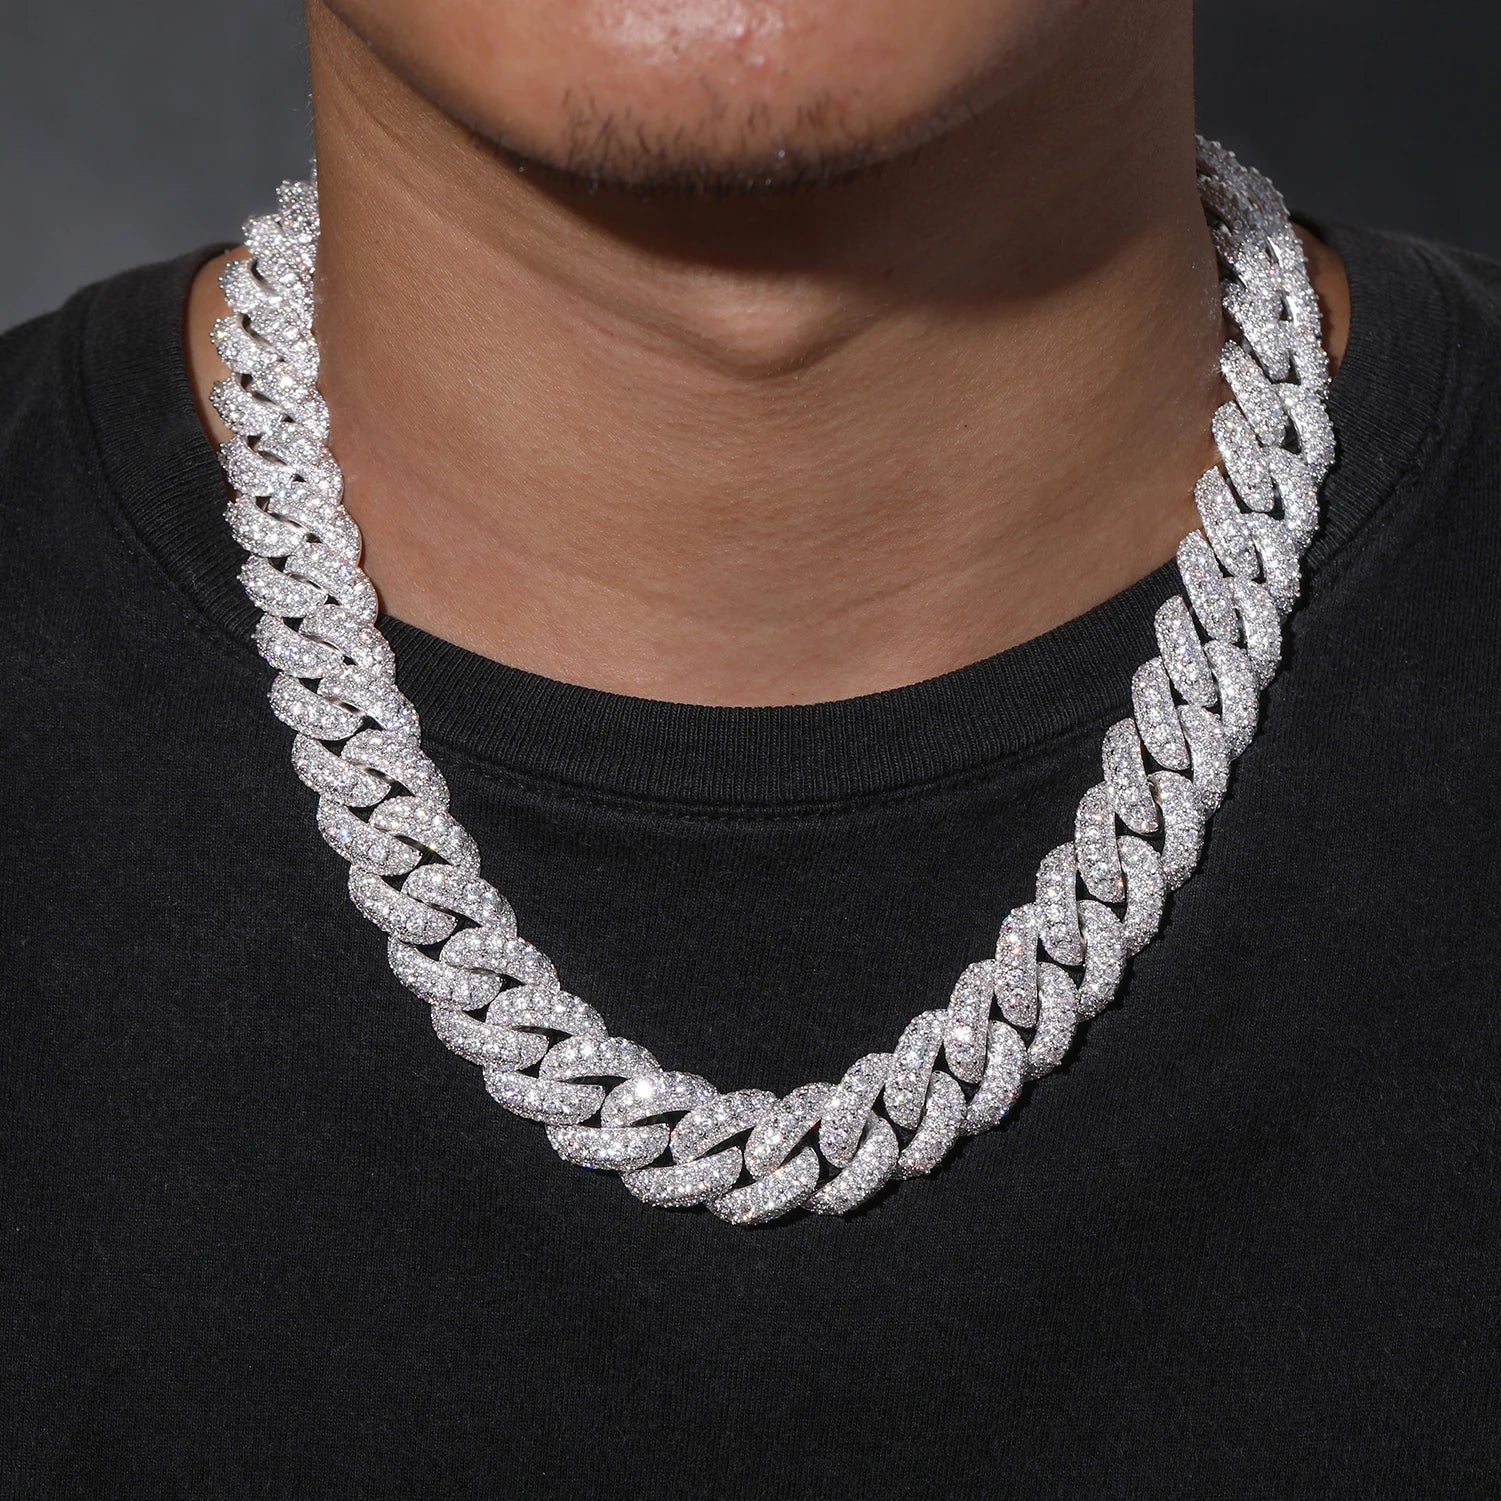 18MM ICED OUT DIAMOND CURVE CUBAN LINK CHAIN NECKLACE - WHITE GOLD